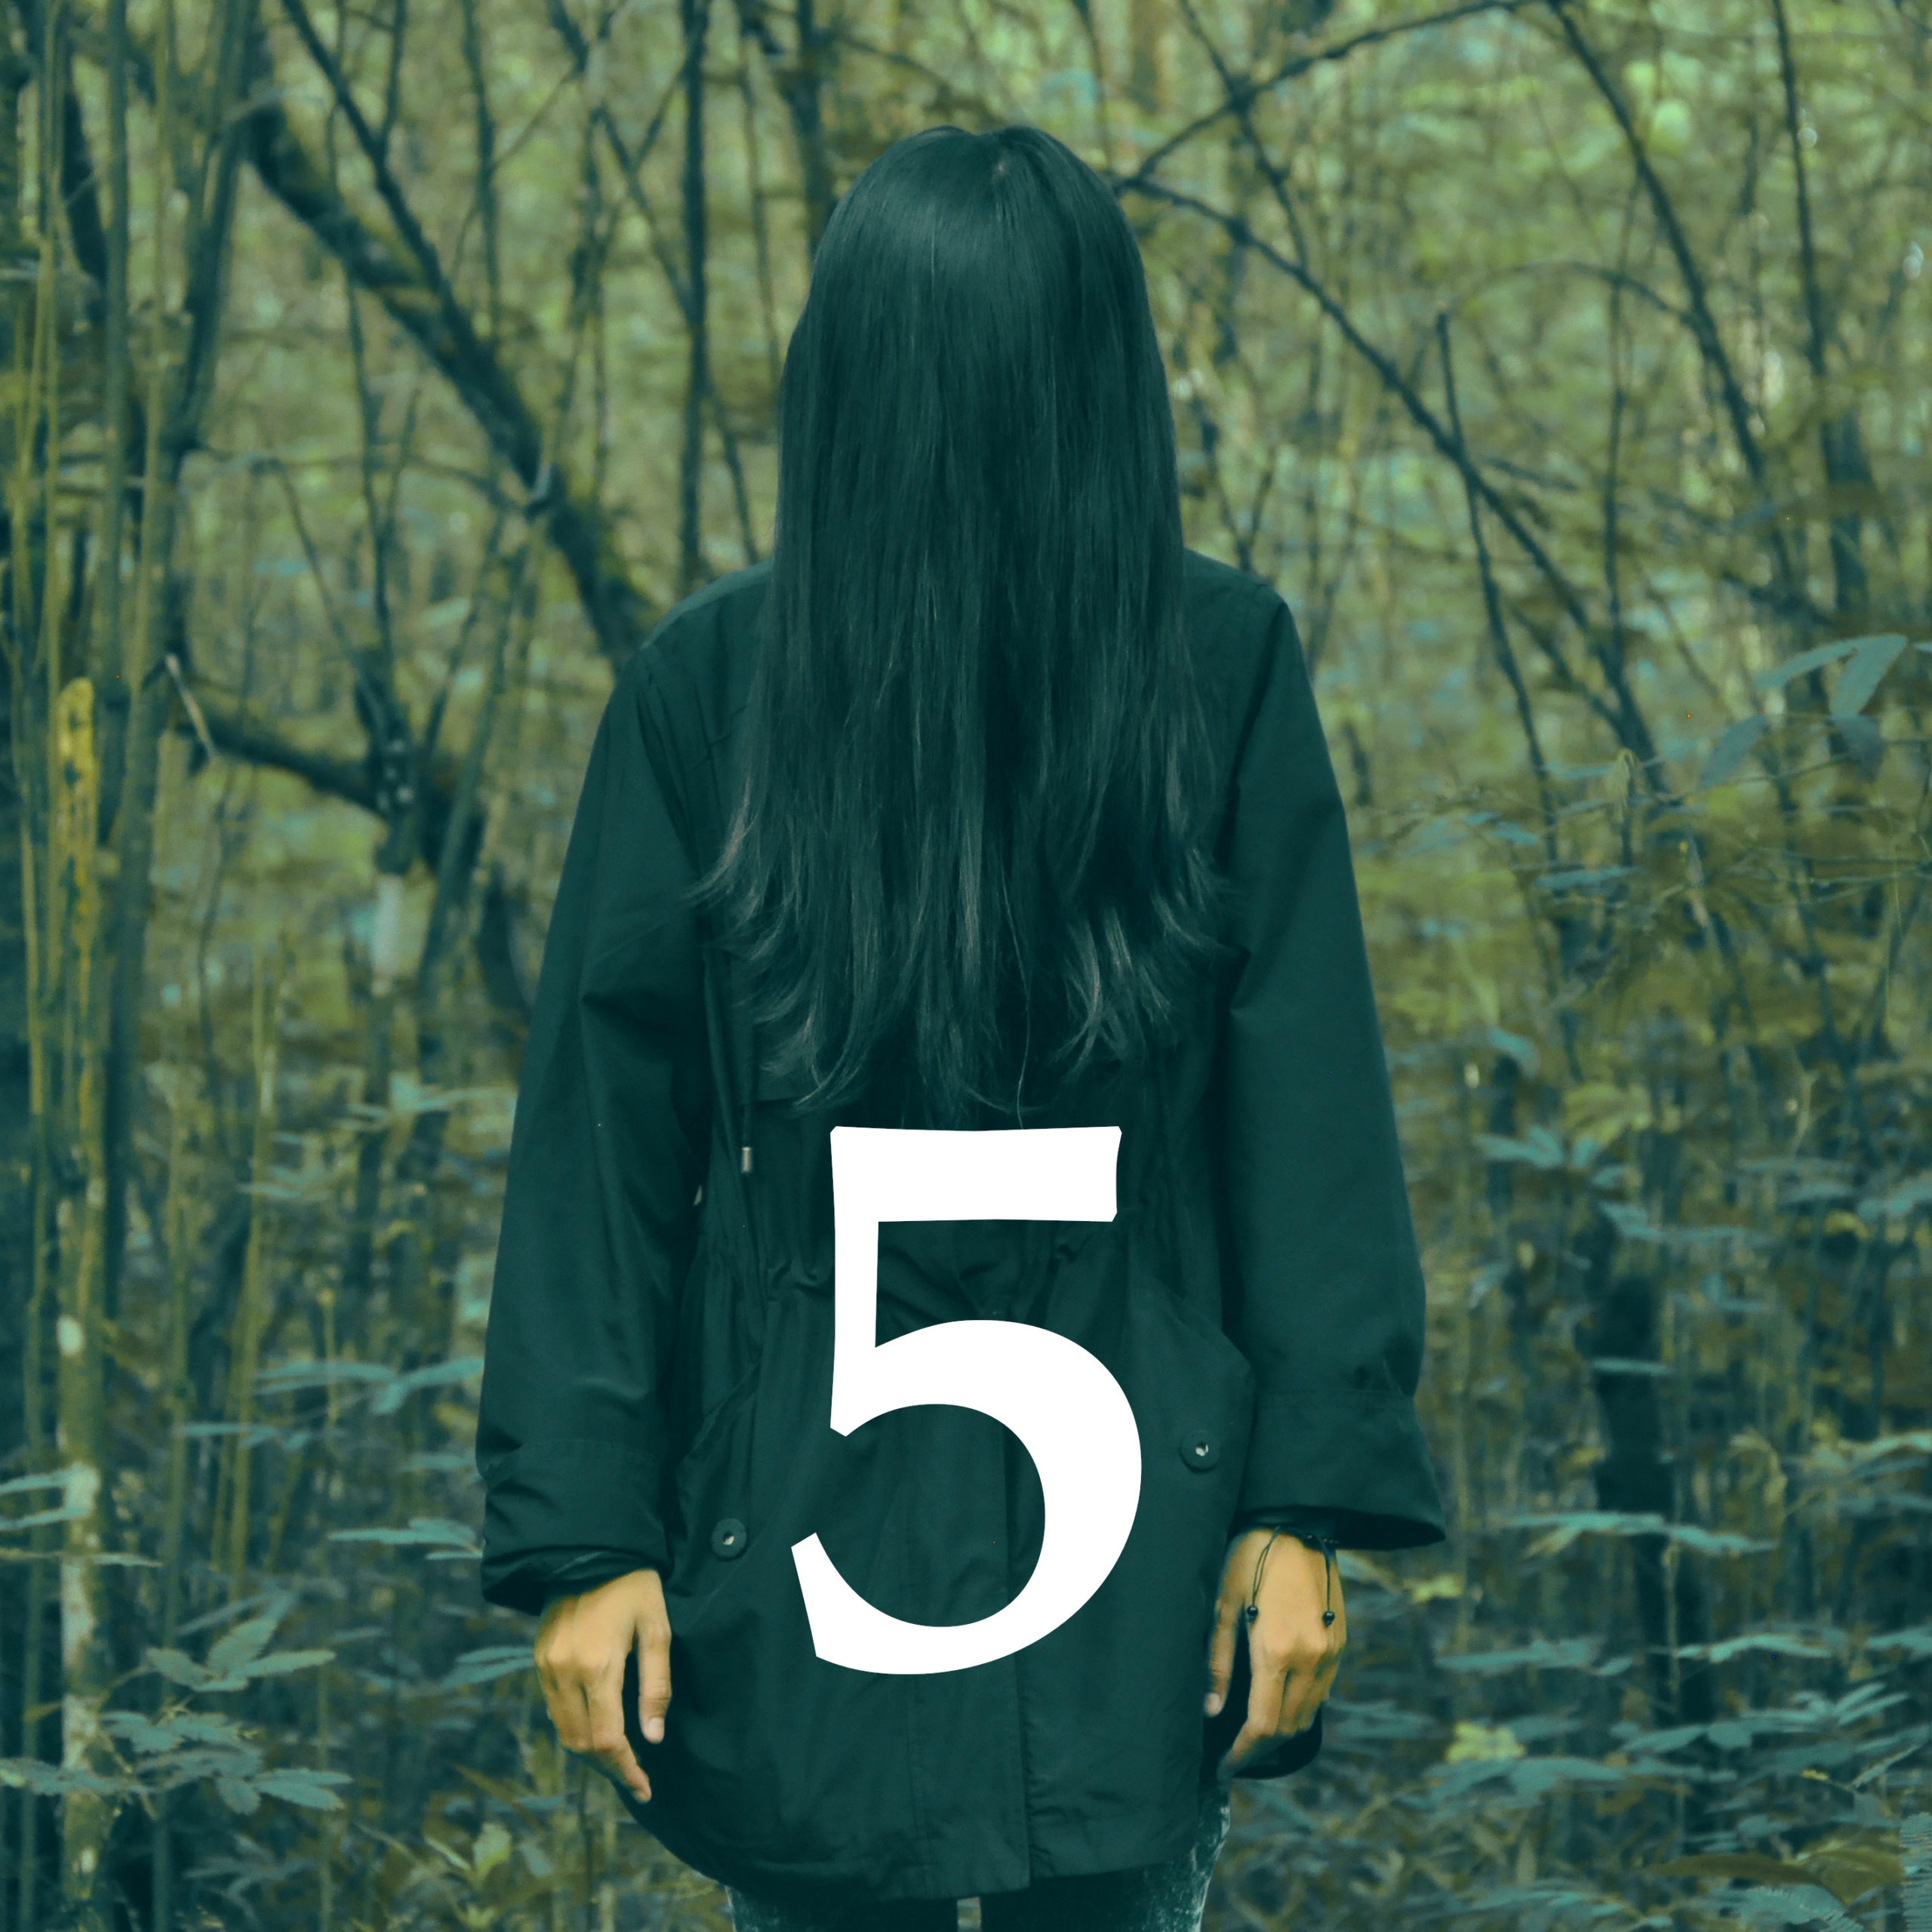 A color photo of a person in a black coat standing in a forest as their long black hair obscures their face.